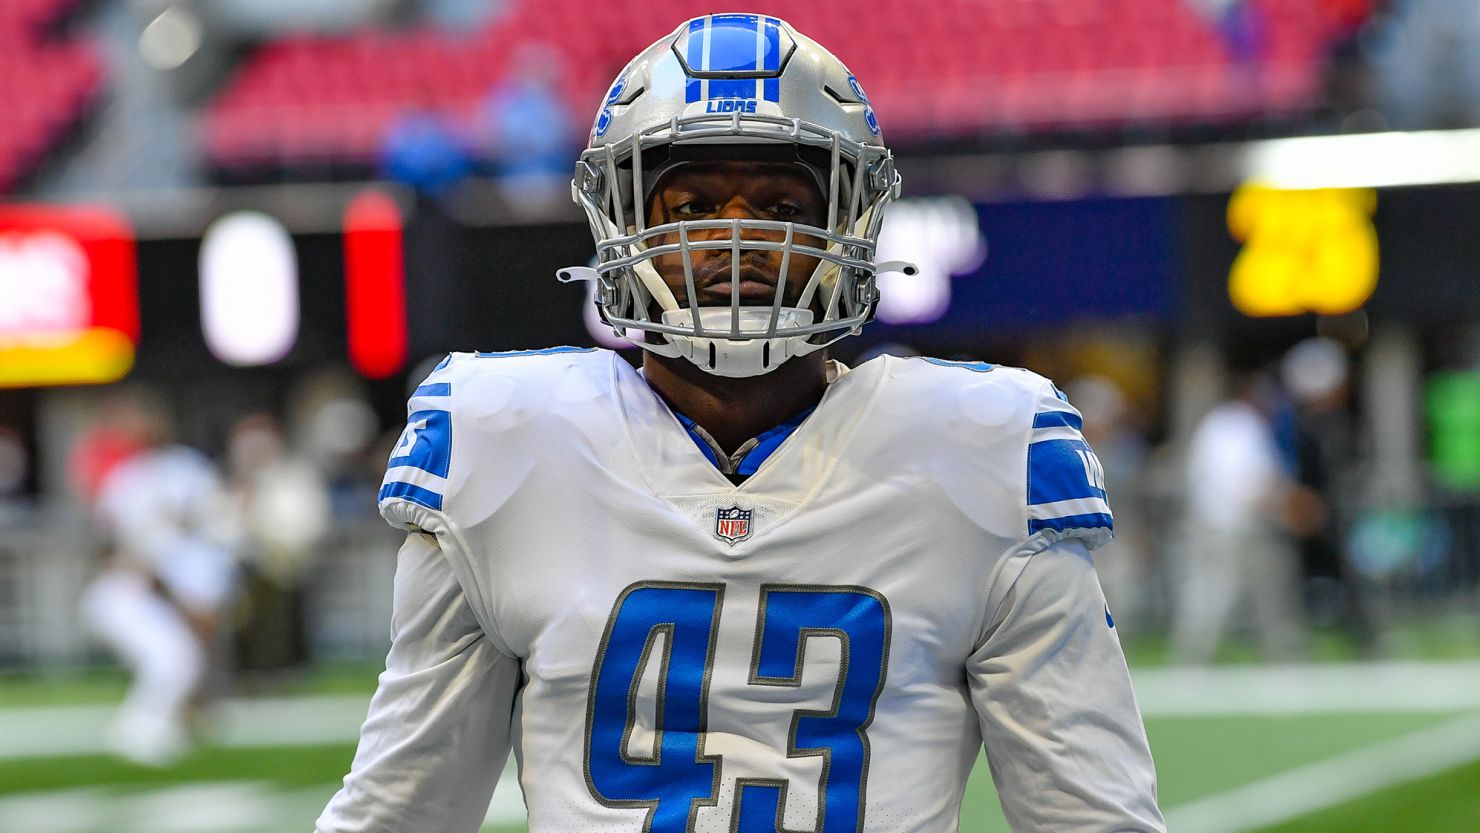 ATLANTA, GA  DECEMBER 26:  Detroit linebacker Rashod Berry (43) warms up prior to the start of the NFL game between the Detroit Lions and the Atlanta Falcons on December 26th, 2021 at Mercedes-Benz Stadium in Atlanta, GA.  (Photo by Rich von Biberstein/Icon Sportswire via Getty Images)